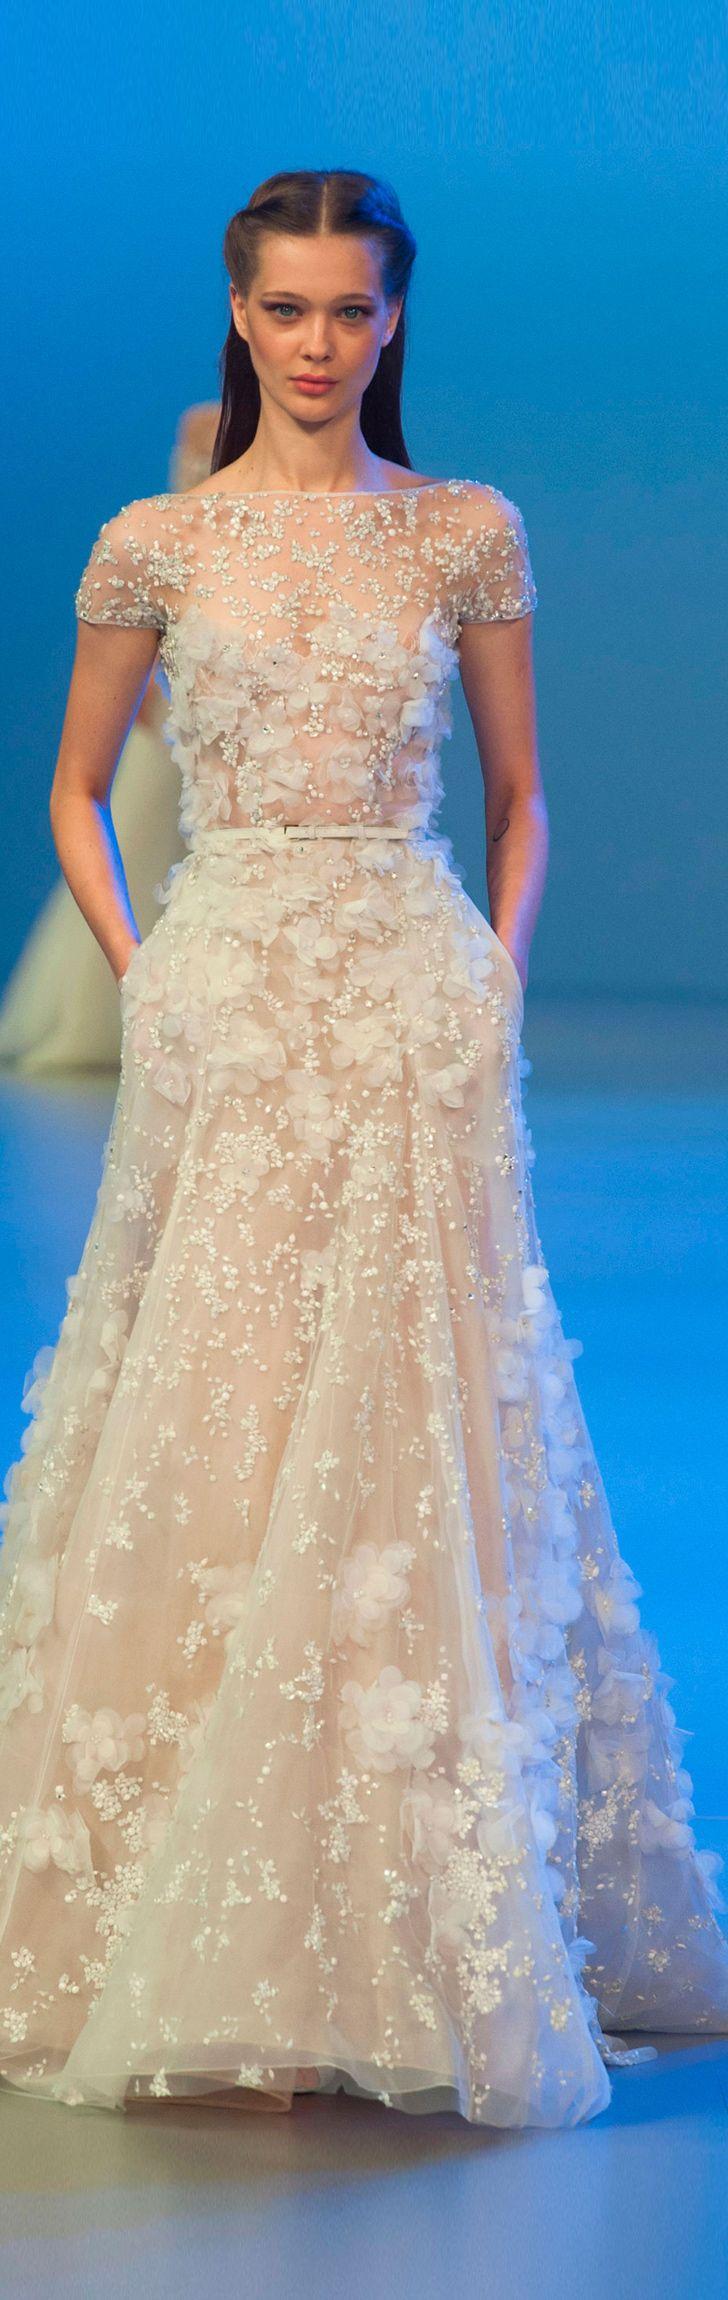 Mariage - 25 Couture Looks We Pinned To Our Mental Wedding Dress Board